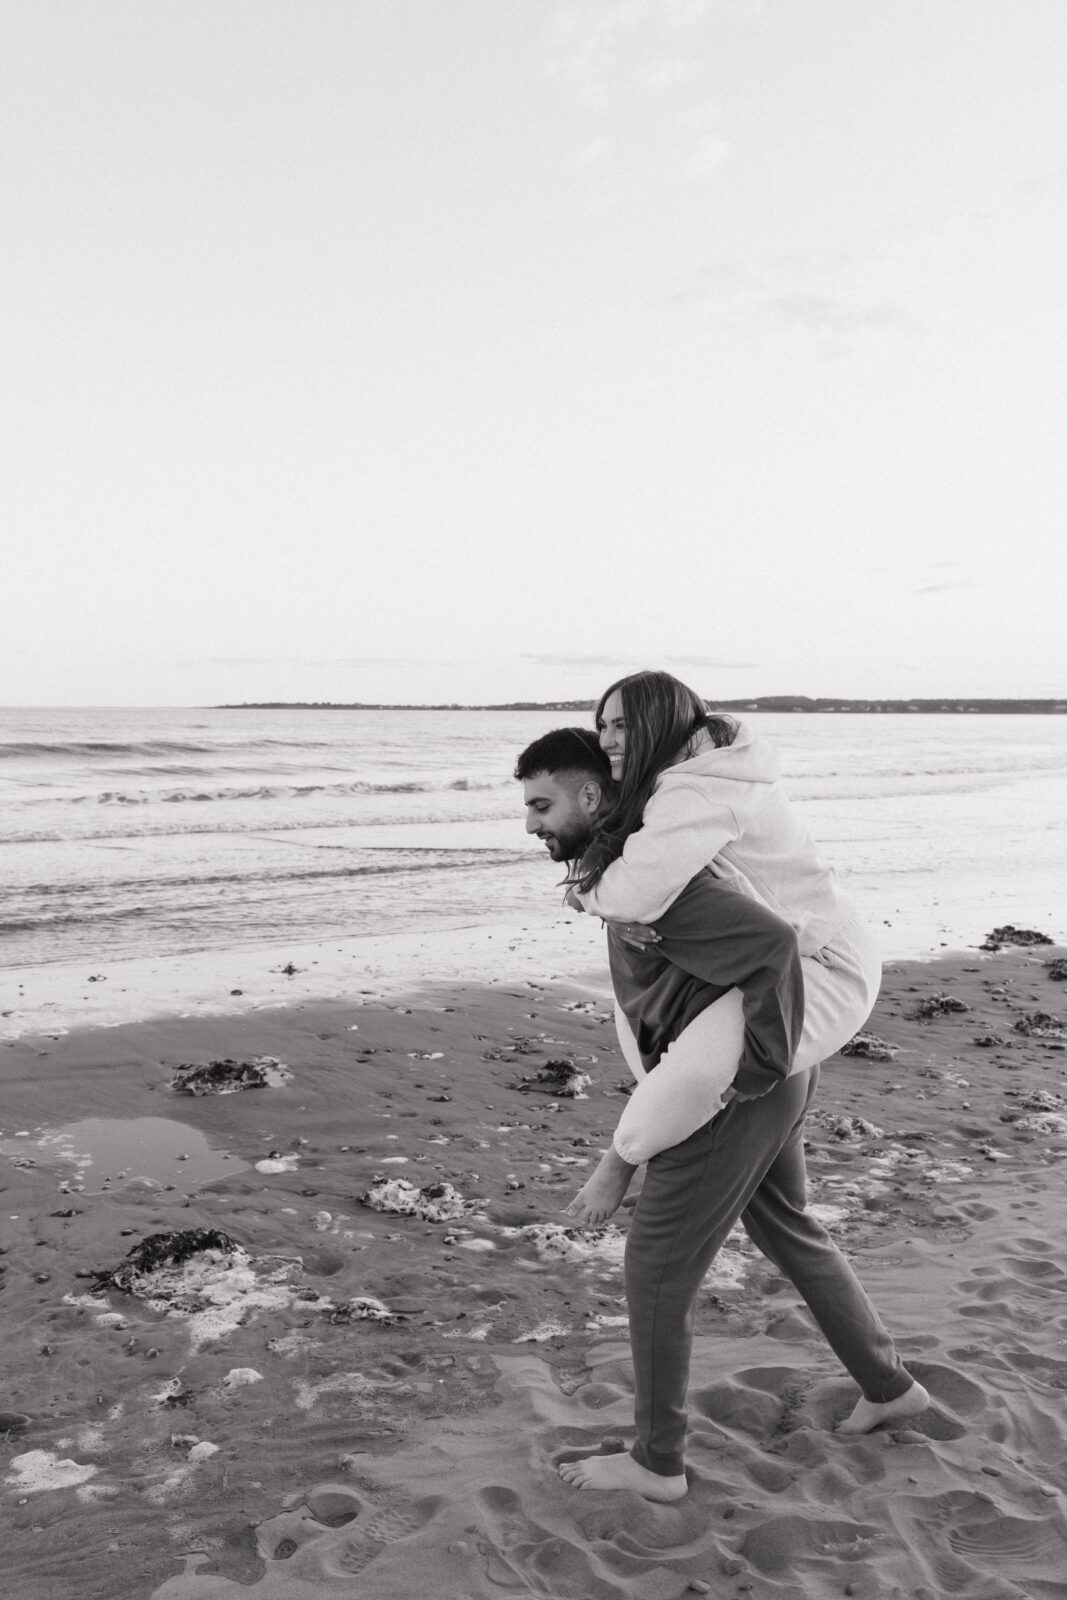 Coastal Engagement Session in Lawrencetown, N.S; Wedding photographer based in Nova Scotia; Janelle Connor Photography